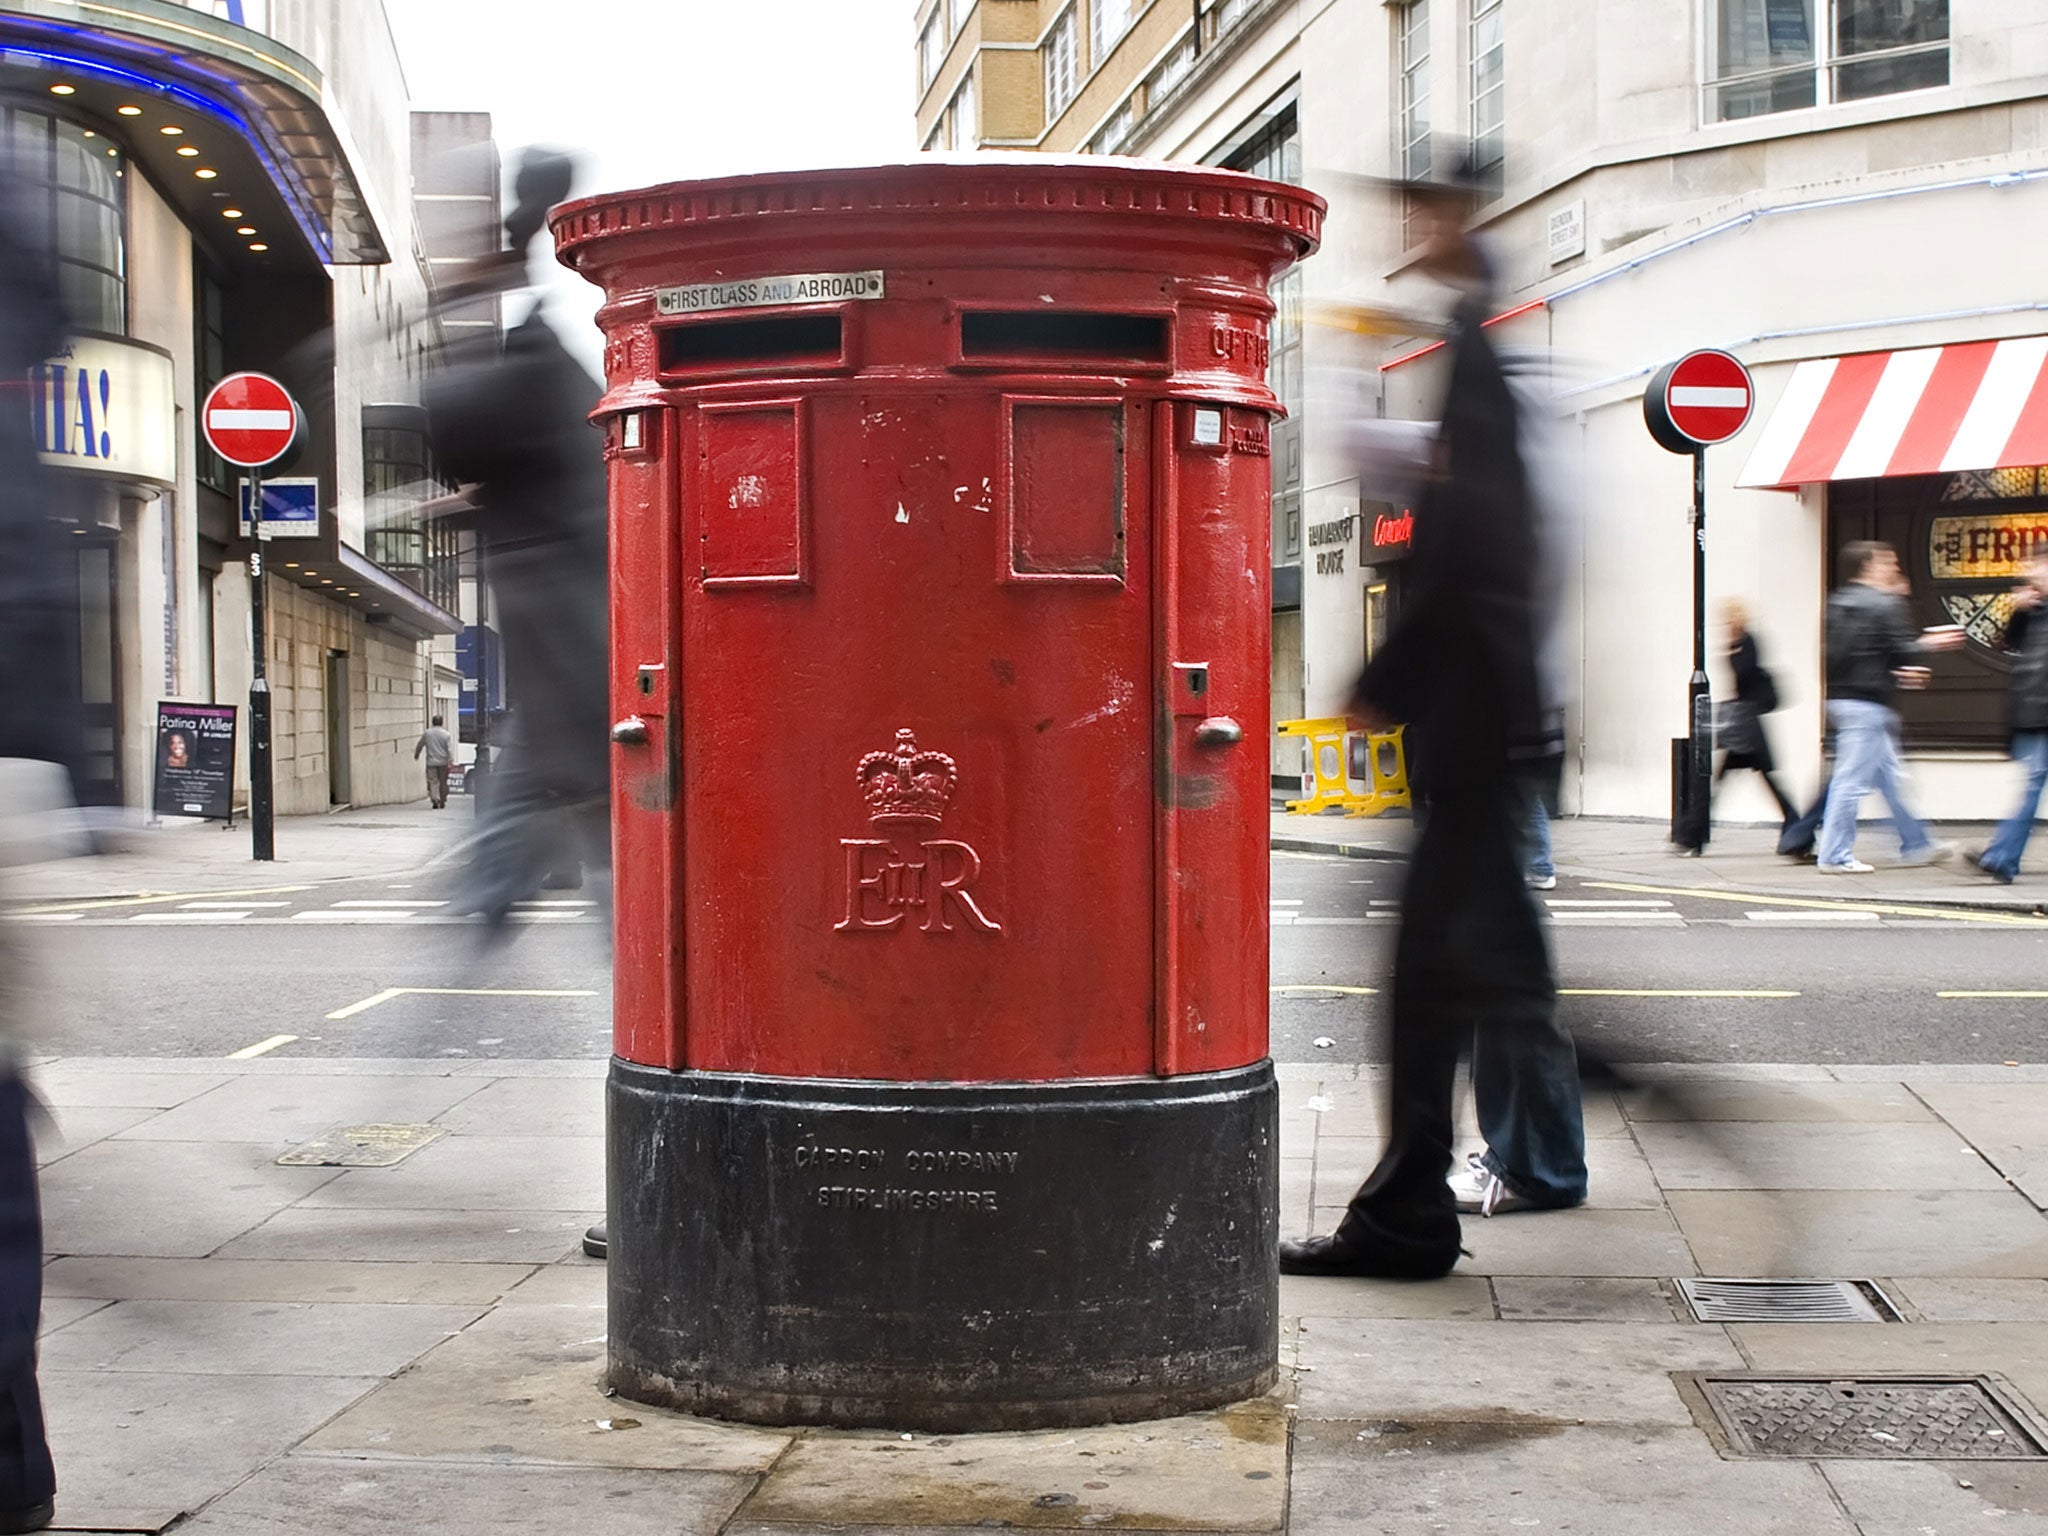 Bennett had been spotted trying to perform a sex act on a red mail box while shouting ‘wow’ in September 2014